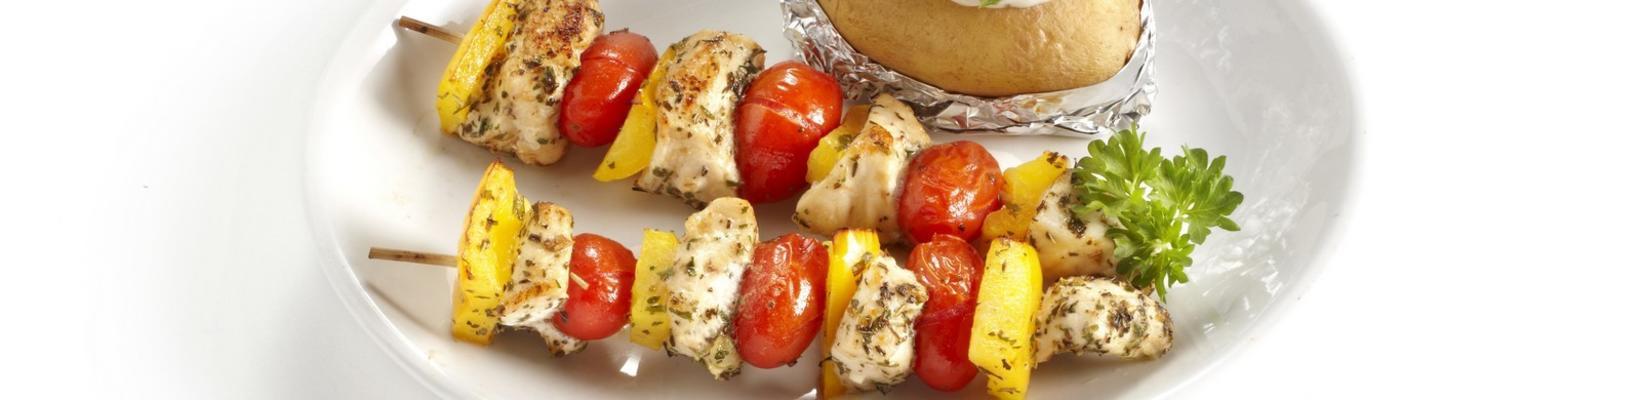 provençal chicken skewers with baked potato